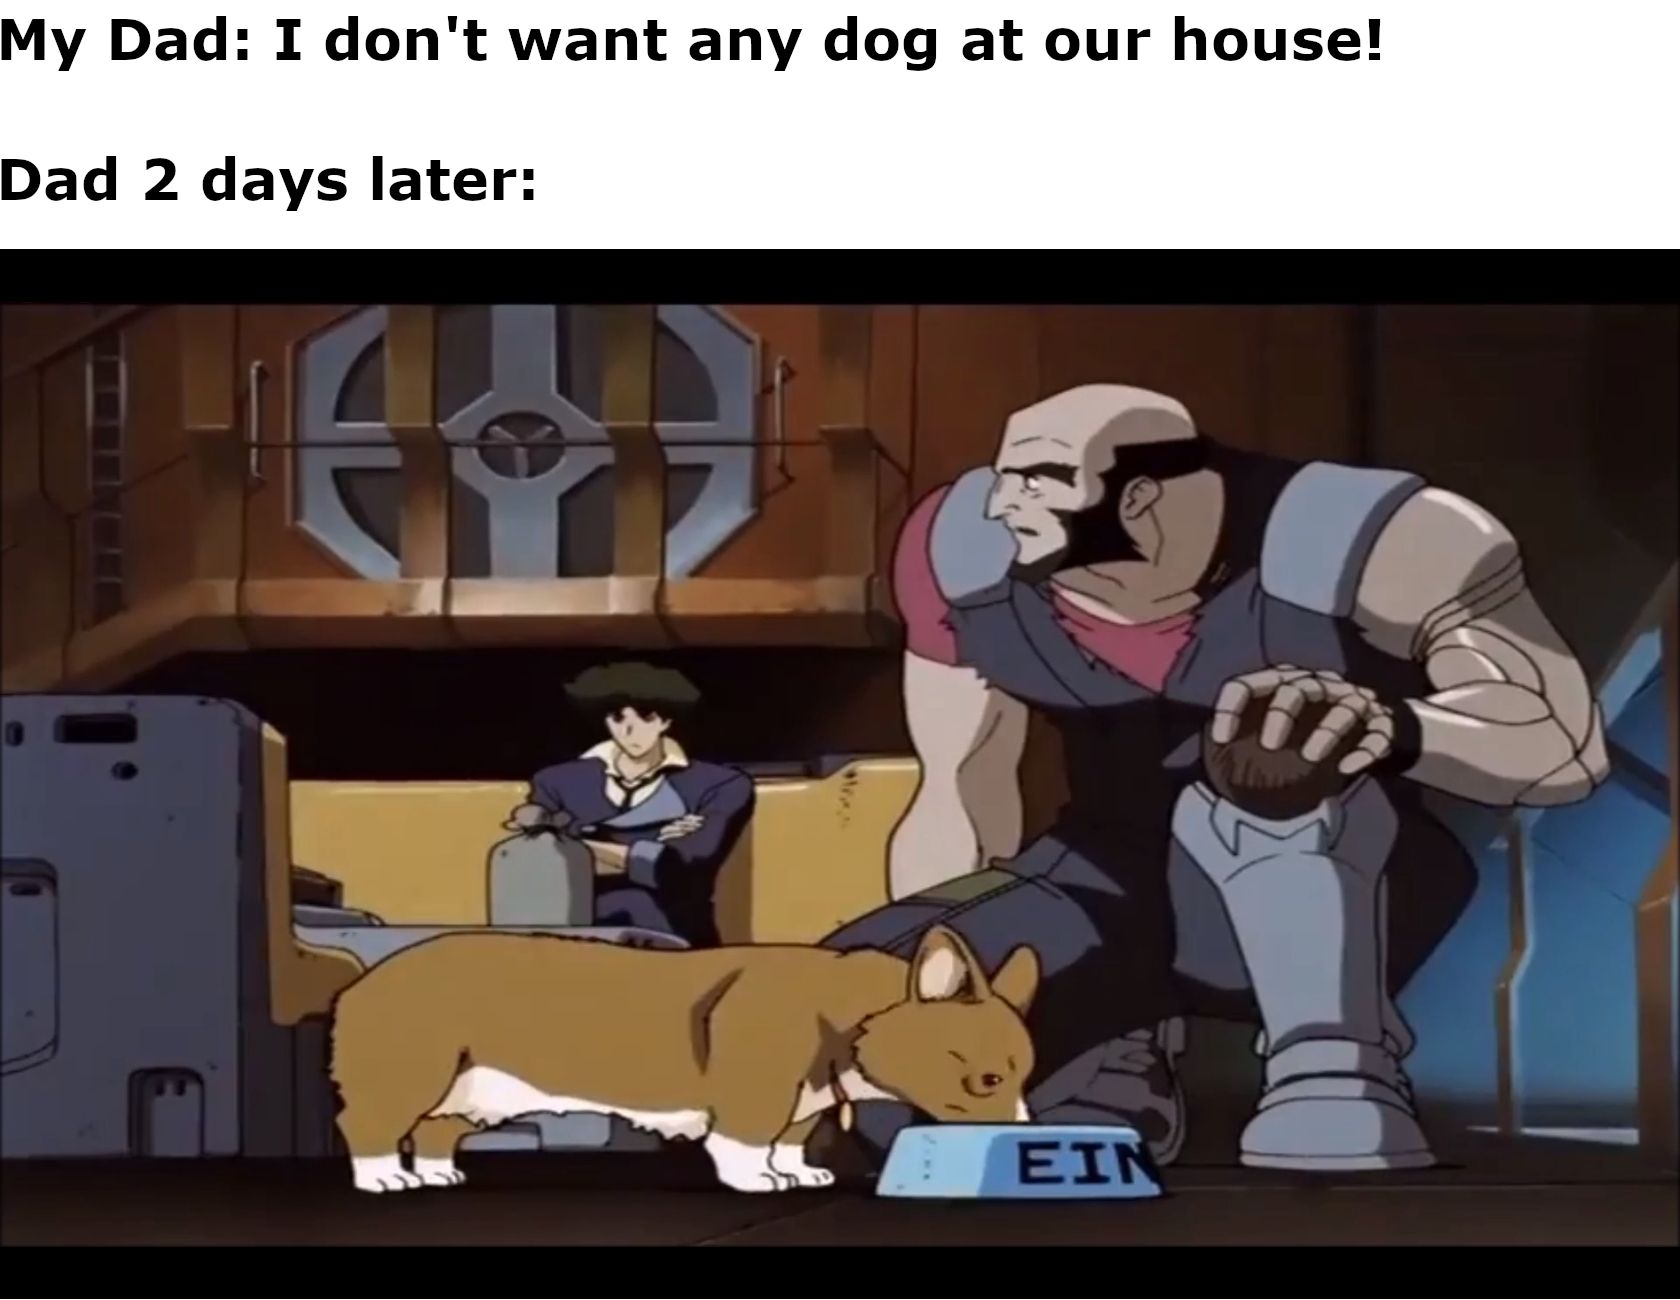 A dad meme featuring Cowboy Bebop's Jet Black and Ein showing how dads opposed to getting a pet quickly love their new friend